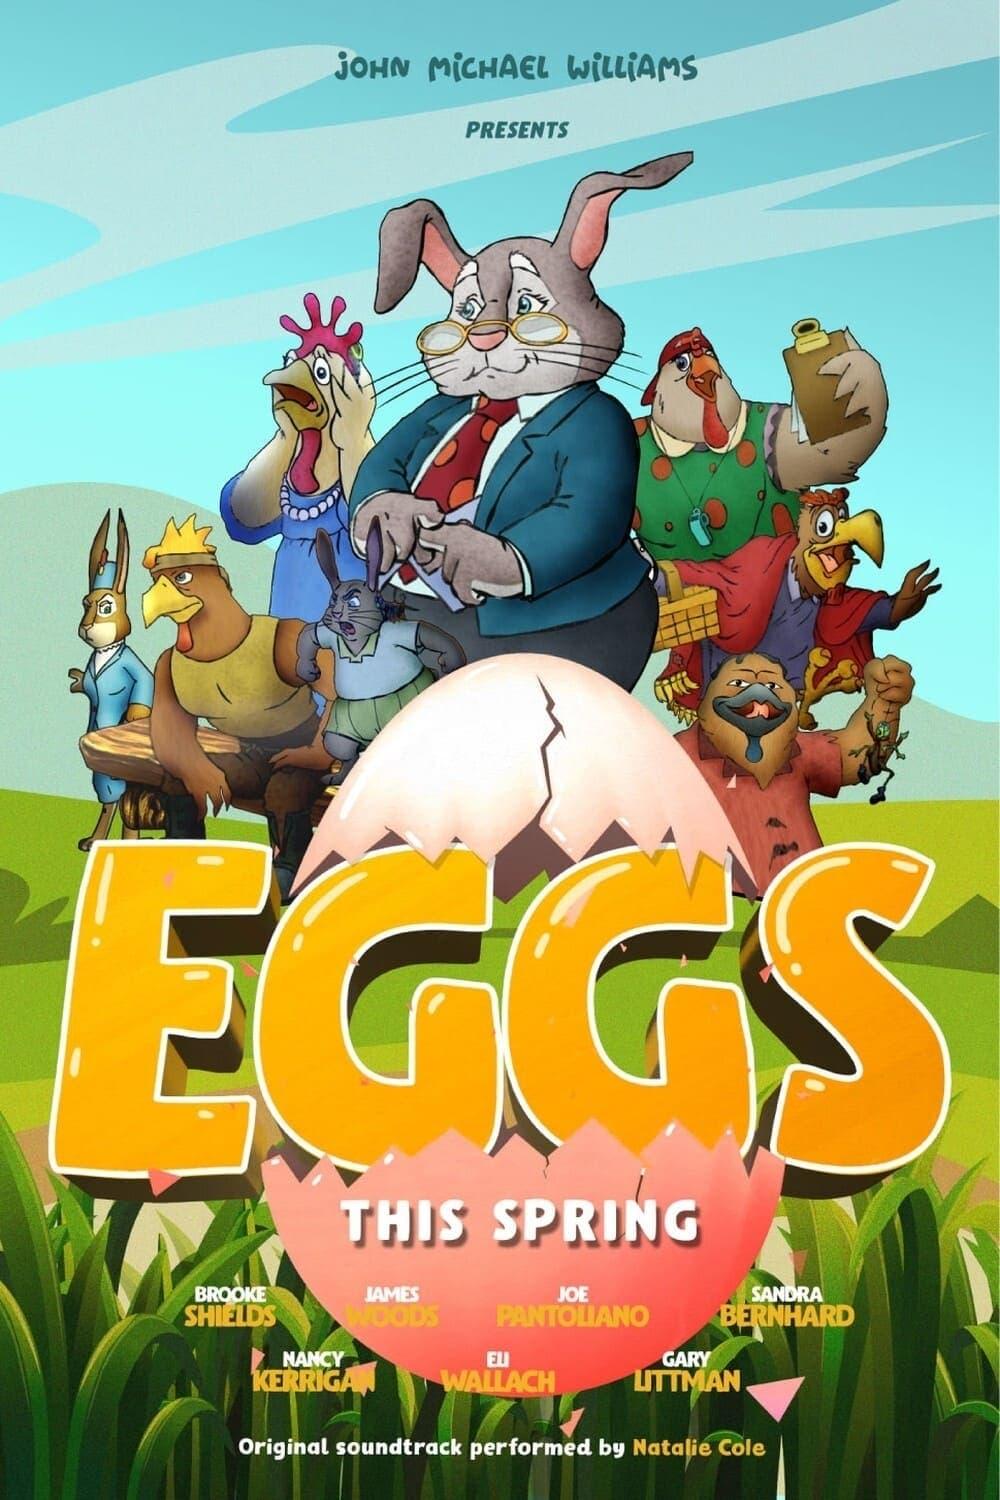 The Easter Egg Adventure poster